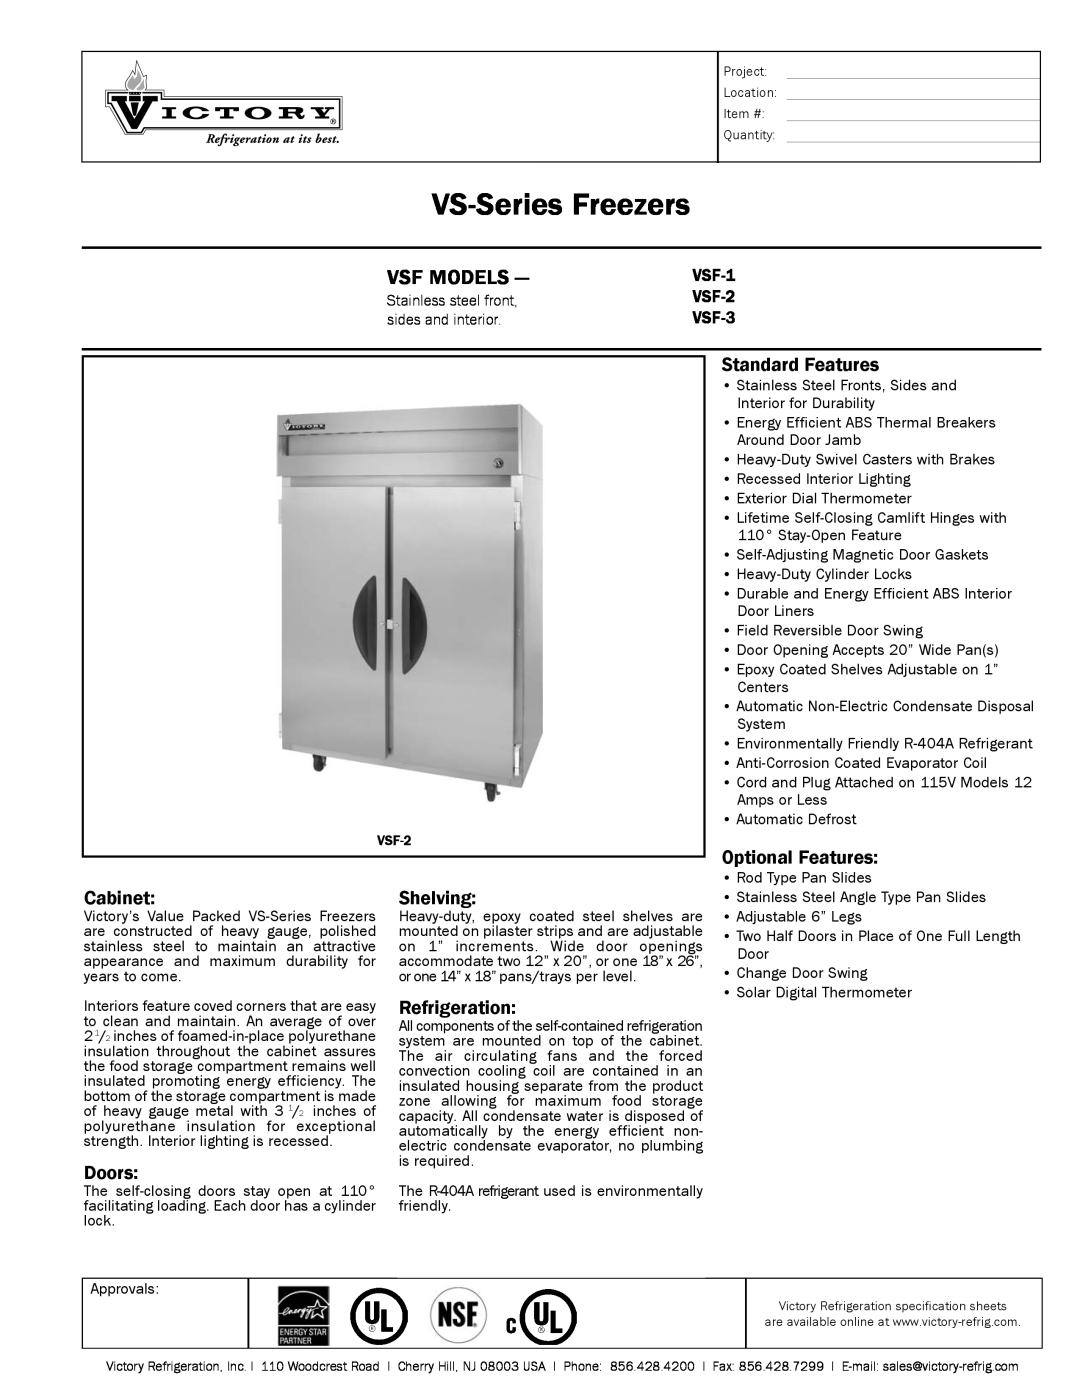 Victory Refrigeration VSF-1 specifications VS-Series Freezers, Vsf Models, Standard Features, Optional Features, Cabinet 